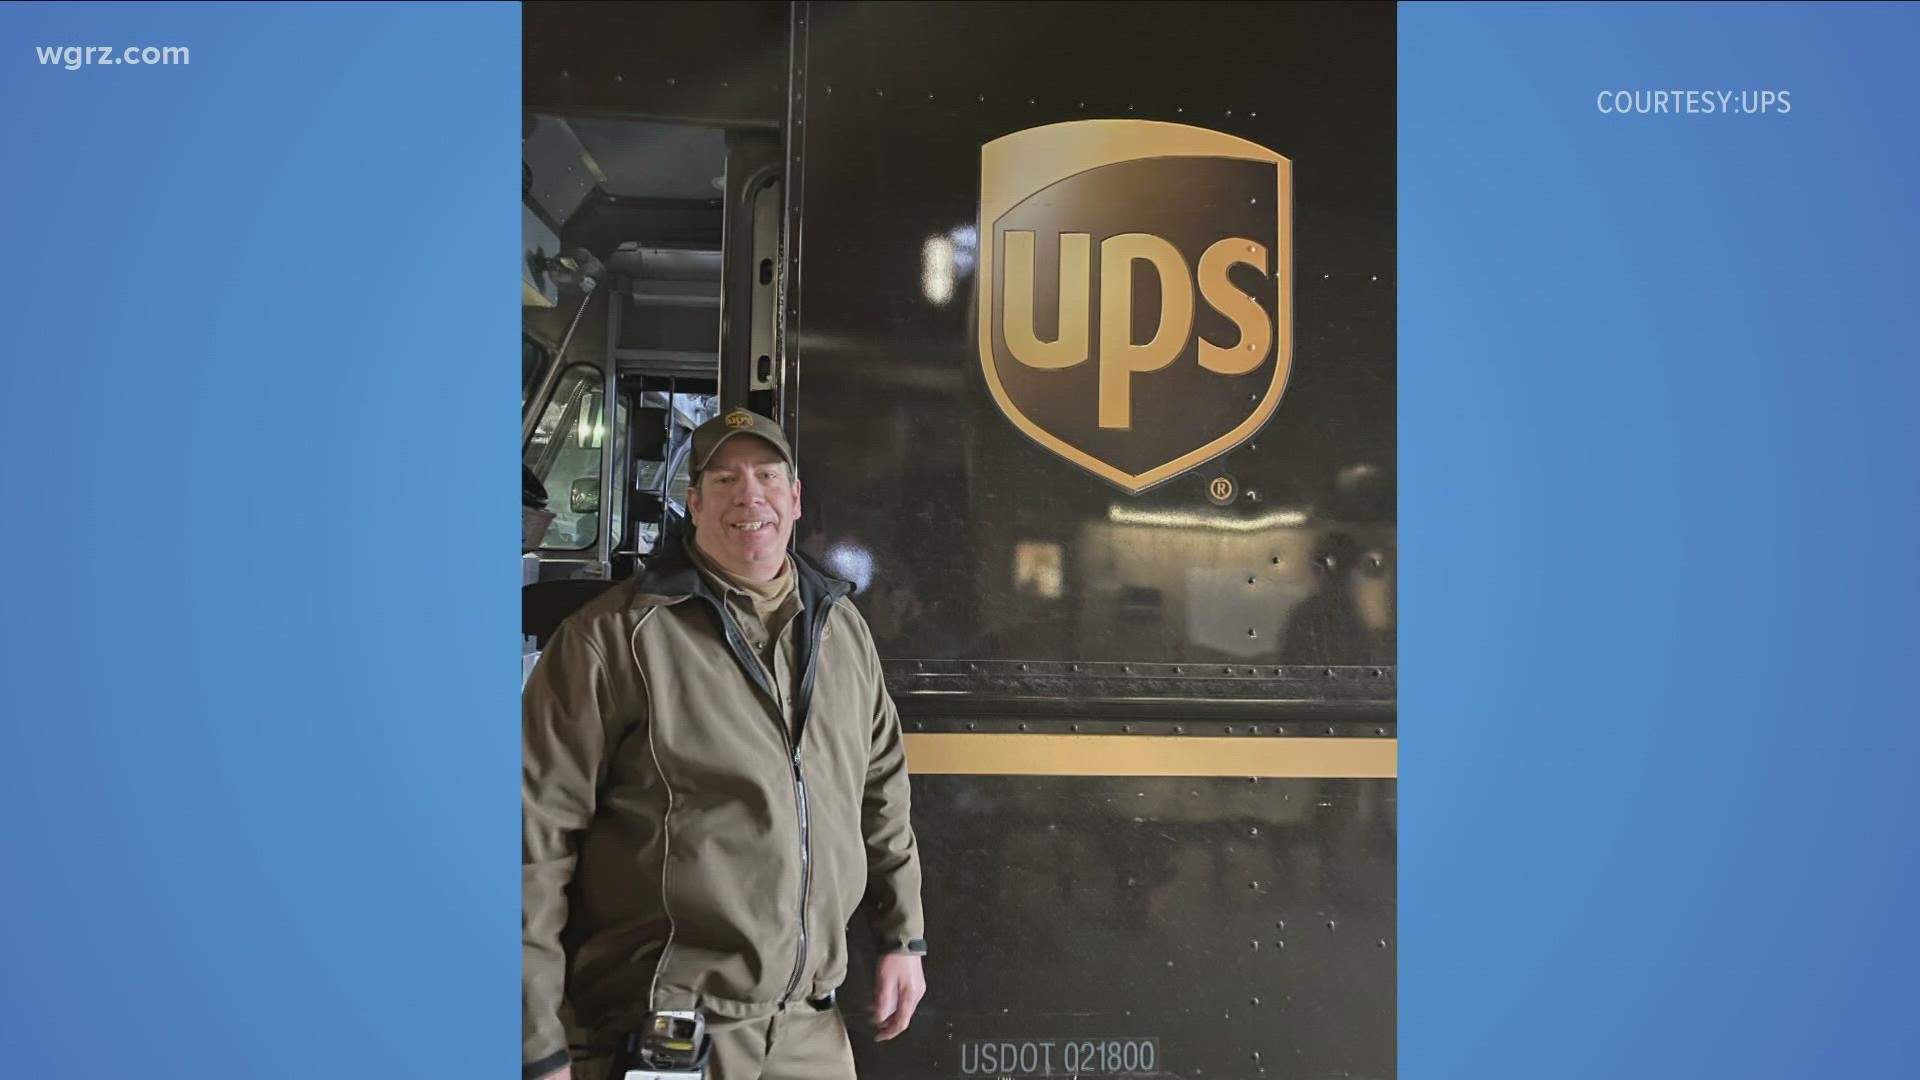 Local UPS driver retires after 34 years and nearly 3 million miles